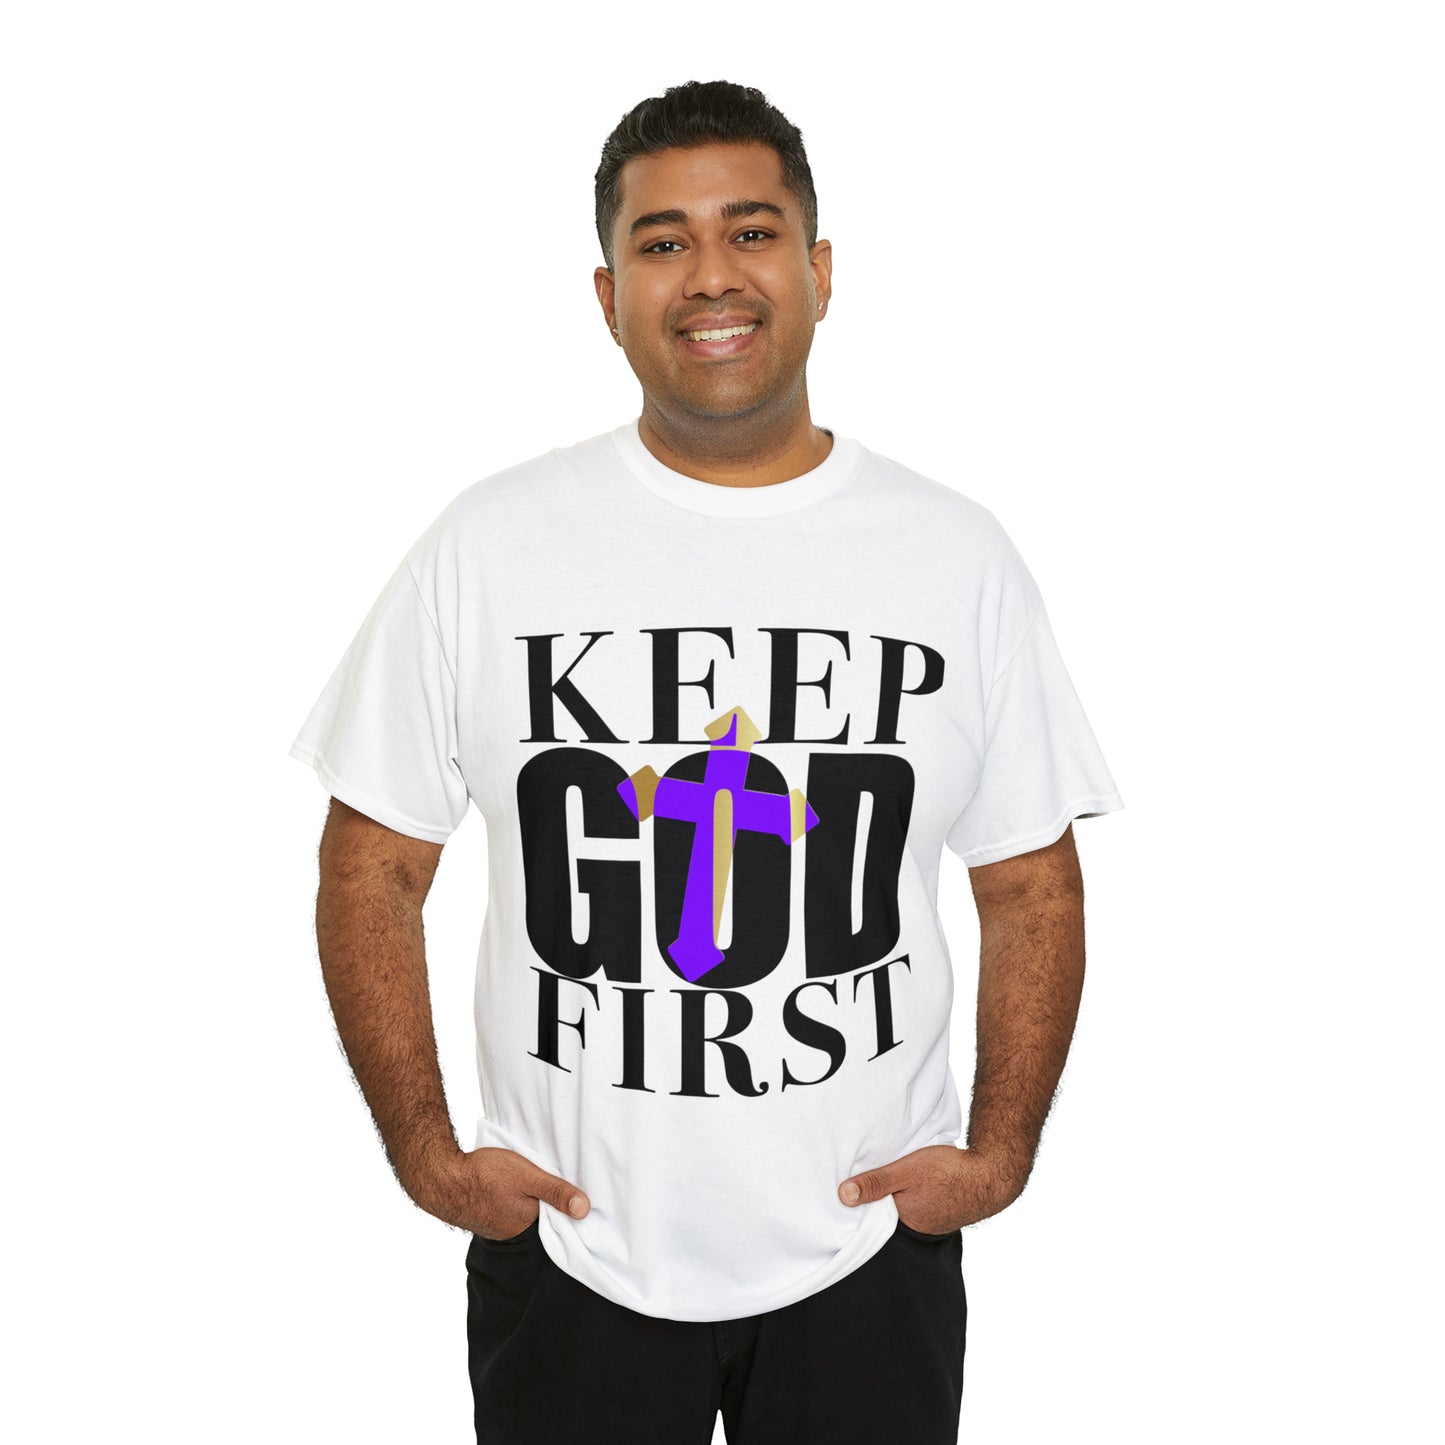 Keep God First - Believer Tee (White)